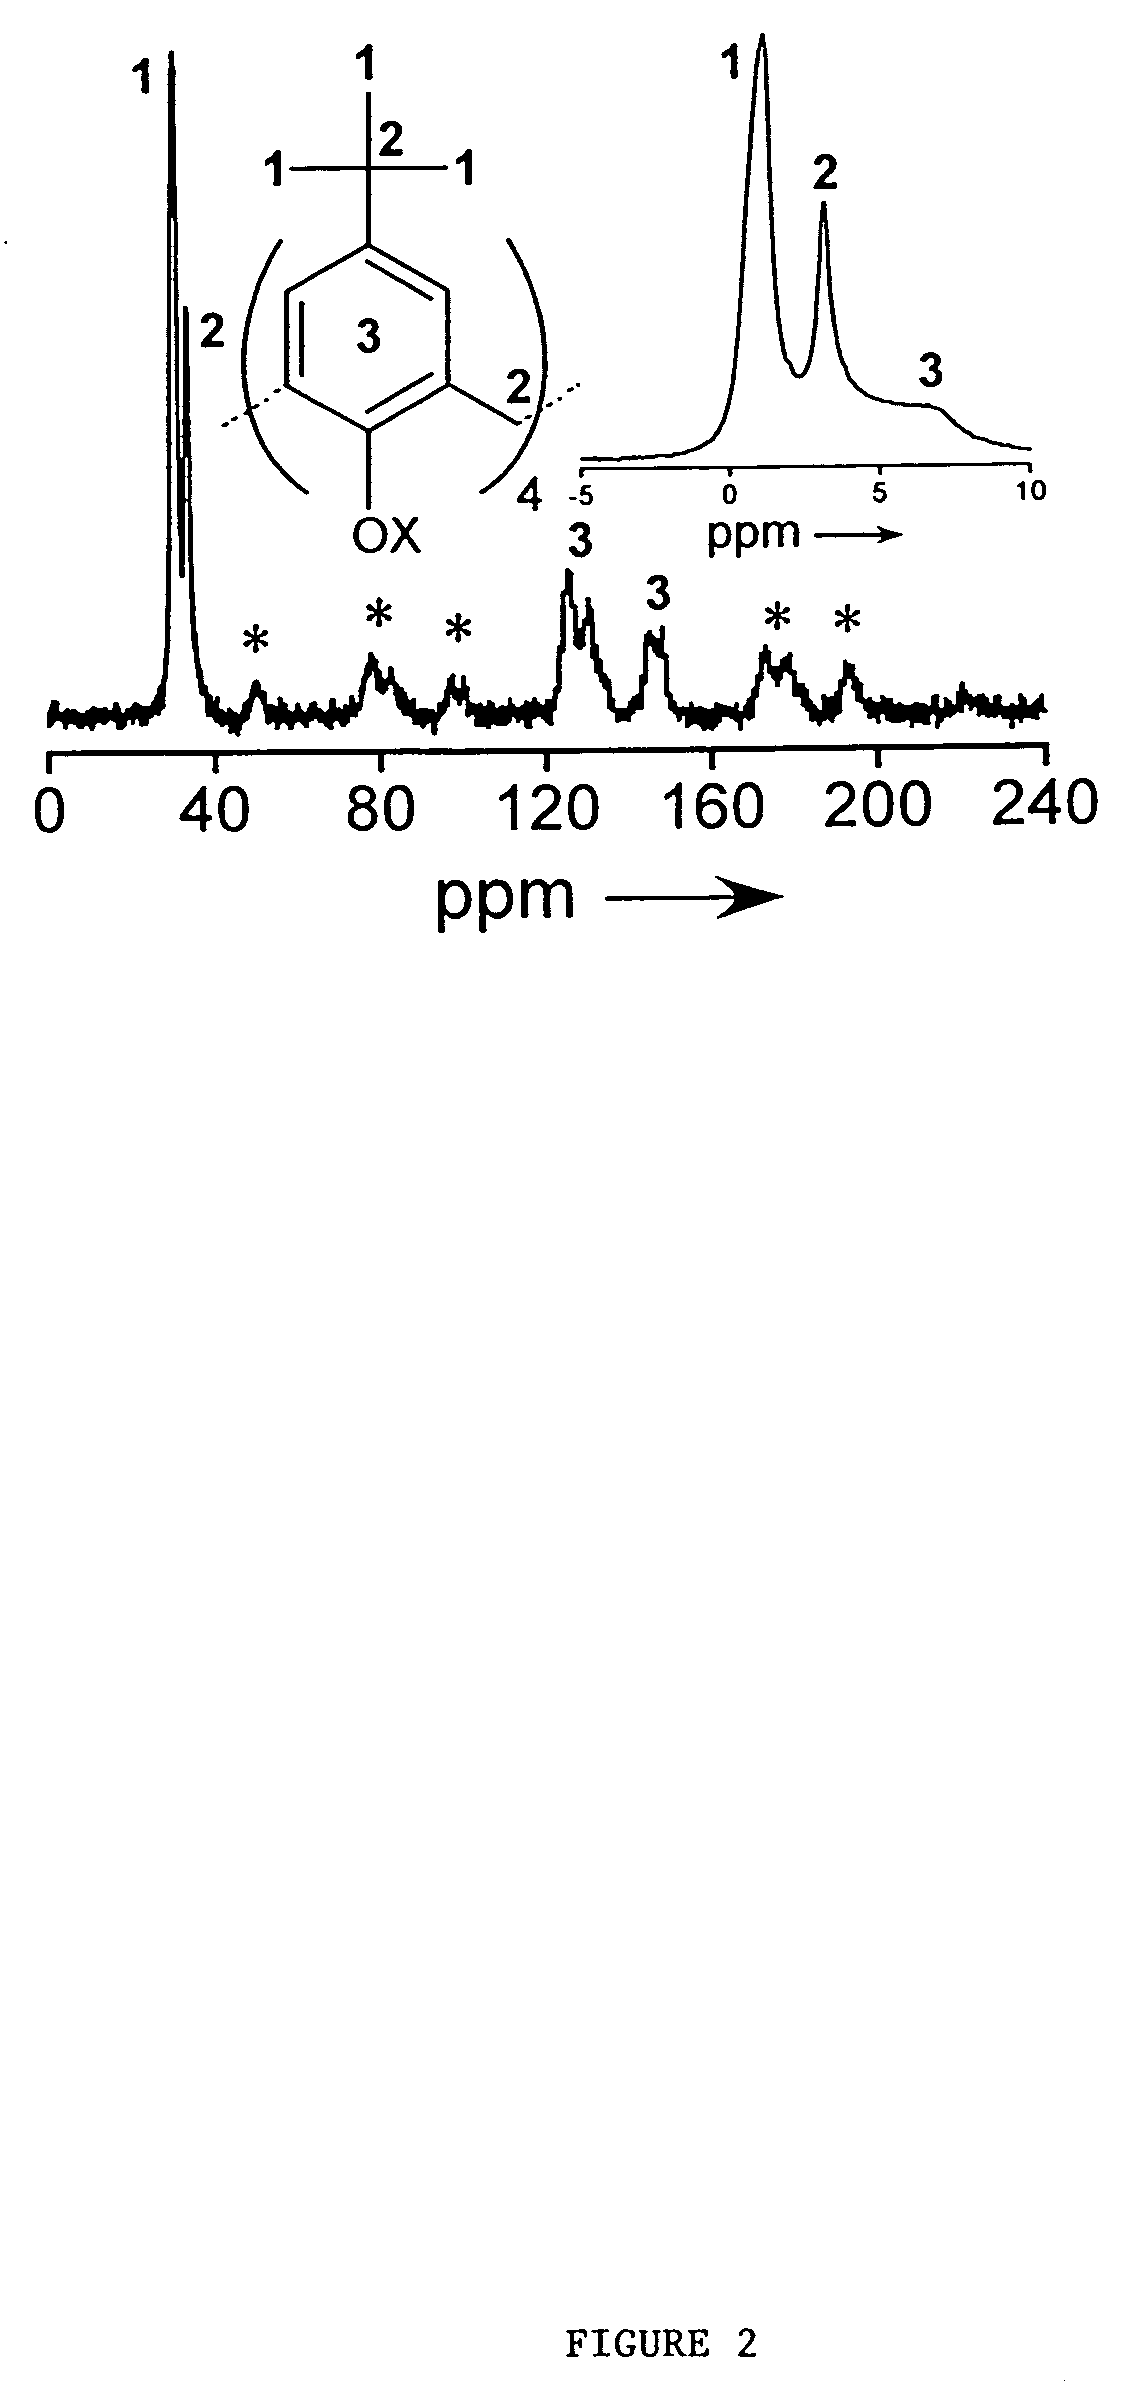 Novel immobilized calixarenes and related compounds and process for their production